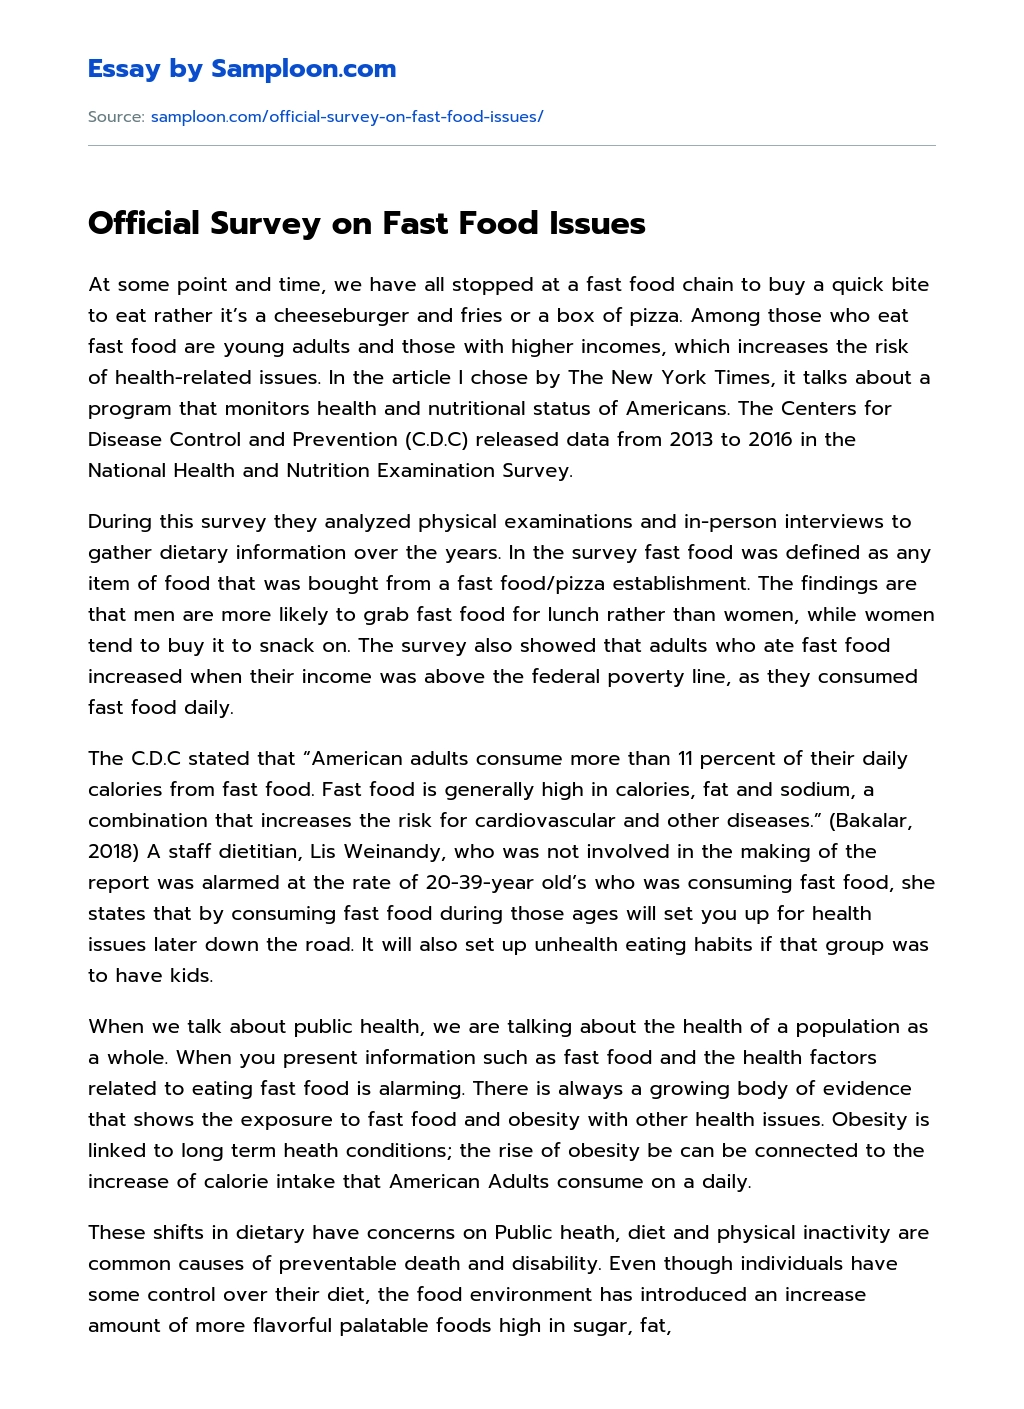 Official Survey on Fast Food Issues essay